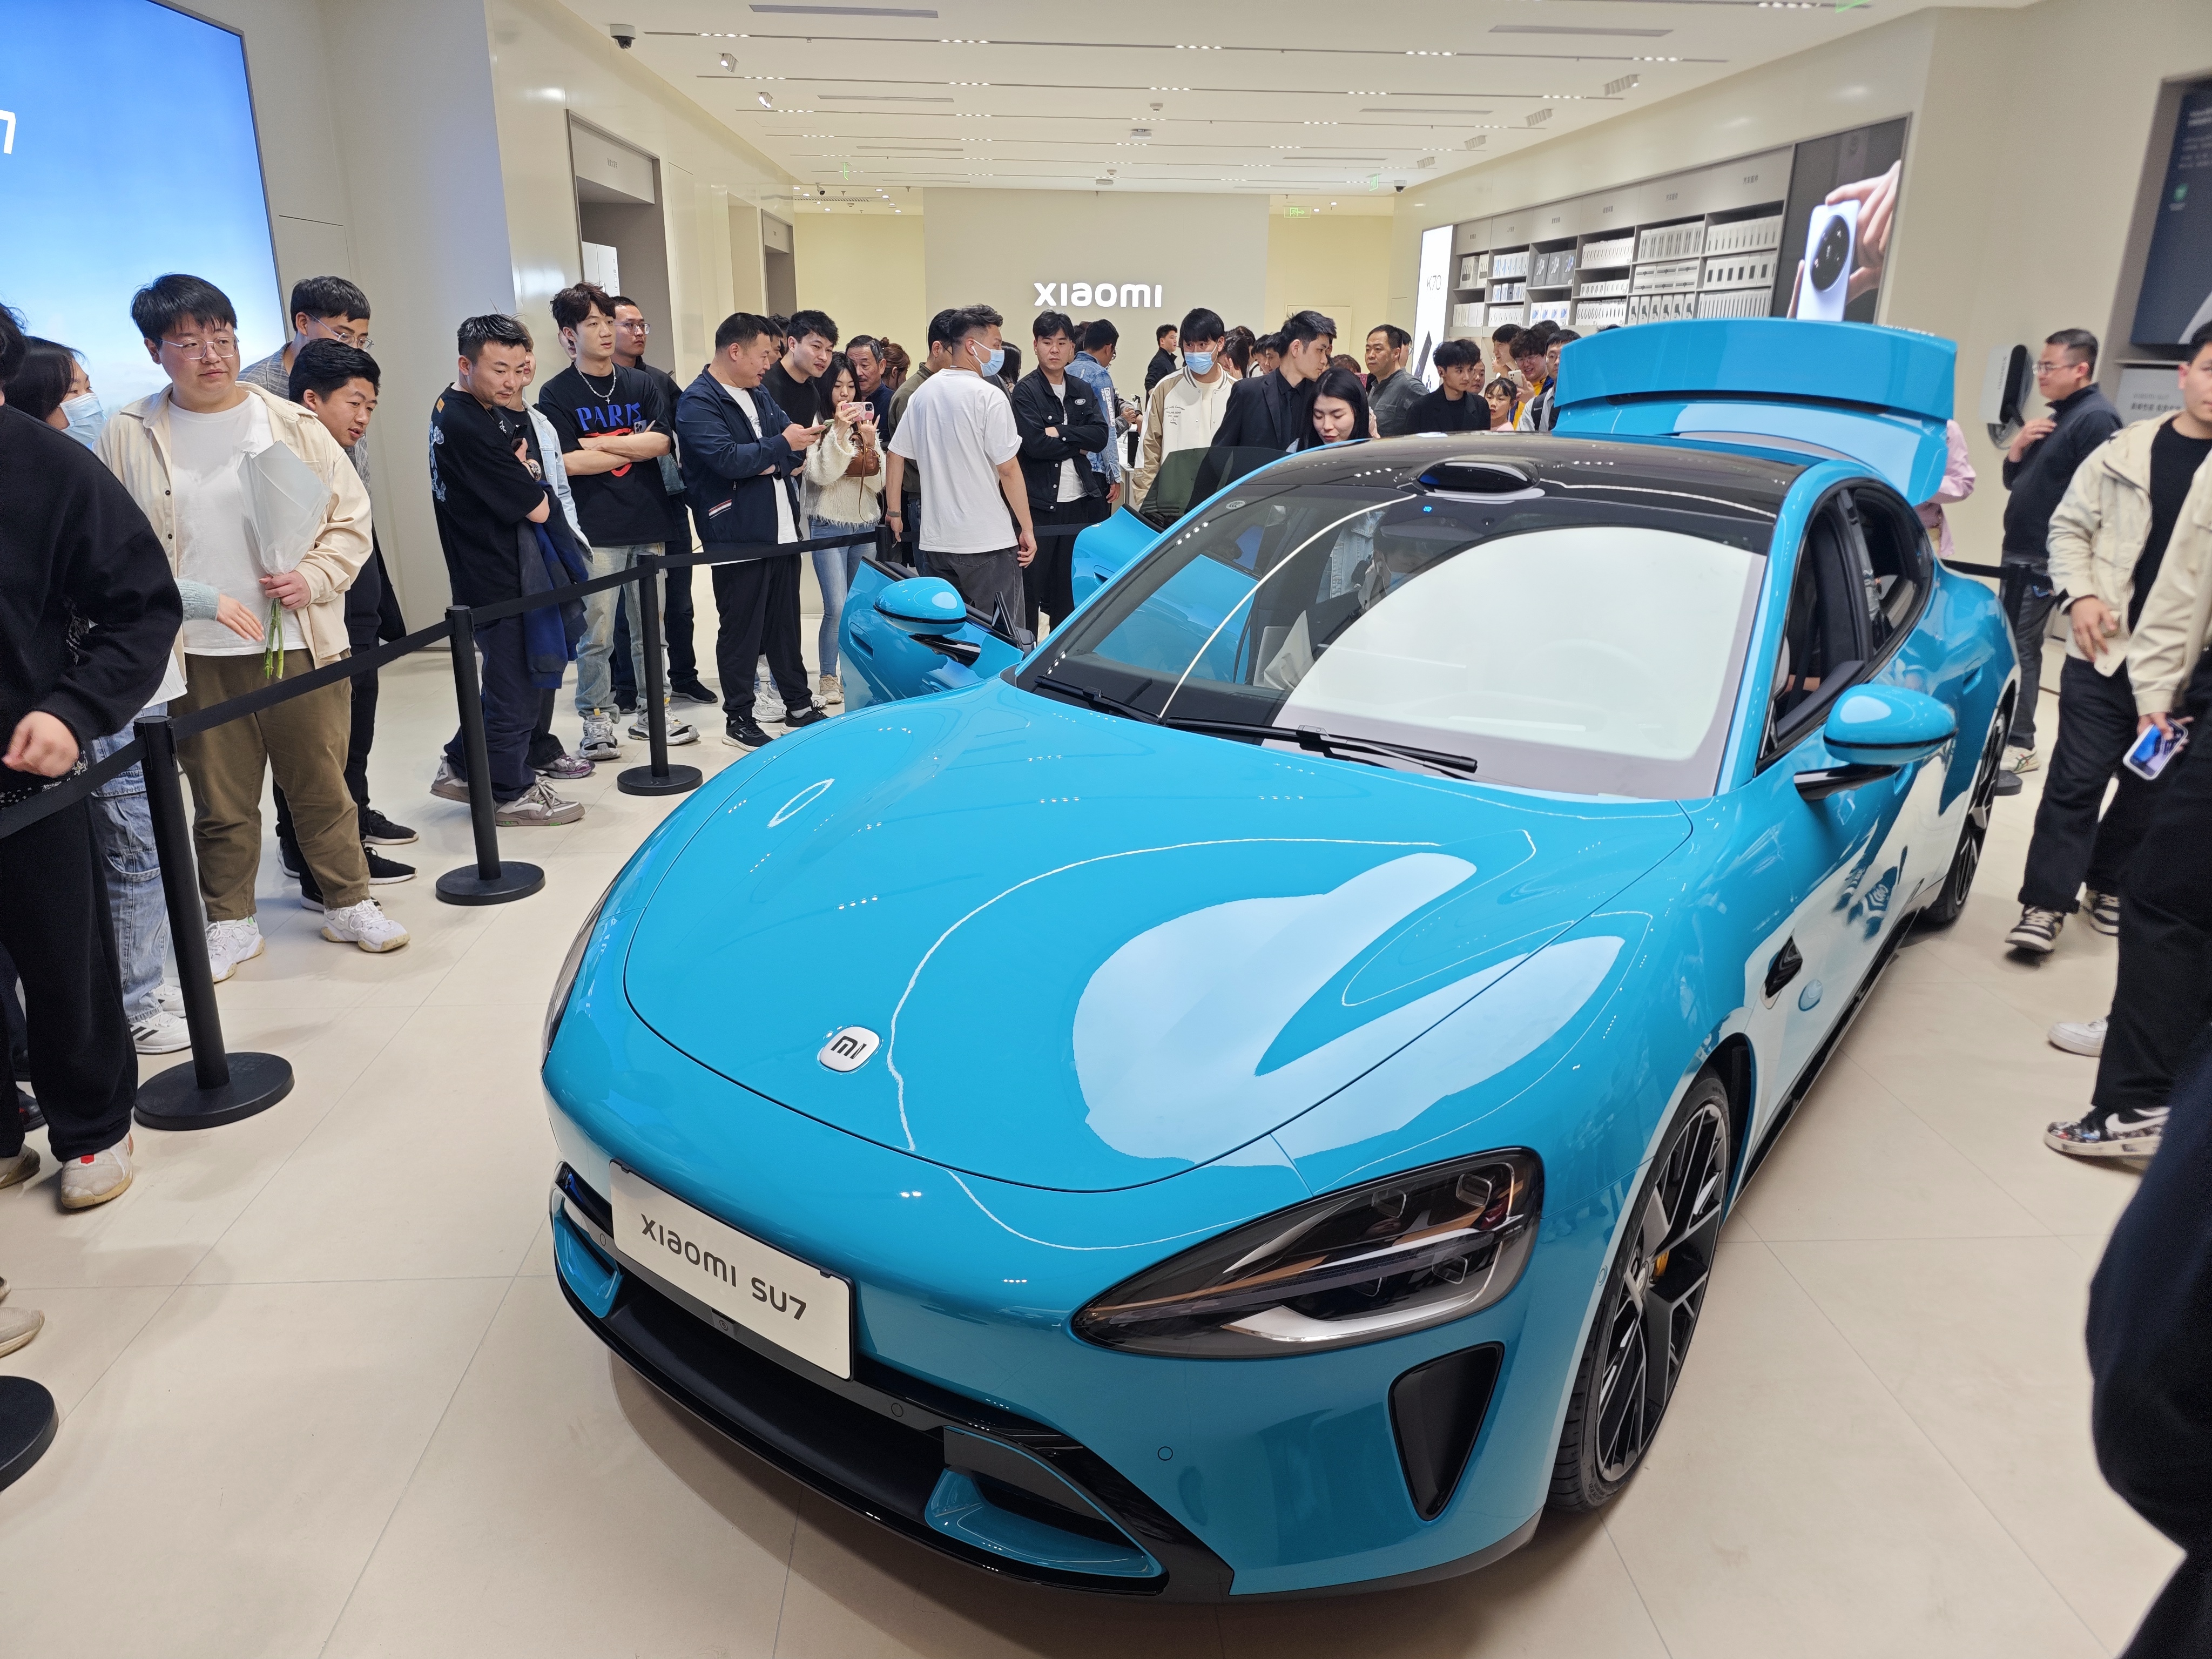 Customers line up at a Xiaomi outlet in Zhengzhou, Henan province to view the new SU7 on Friday. Photo: VCG